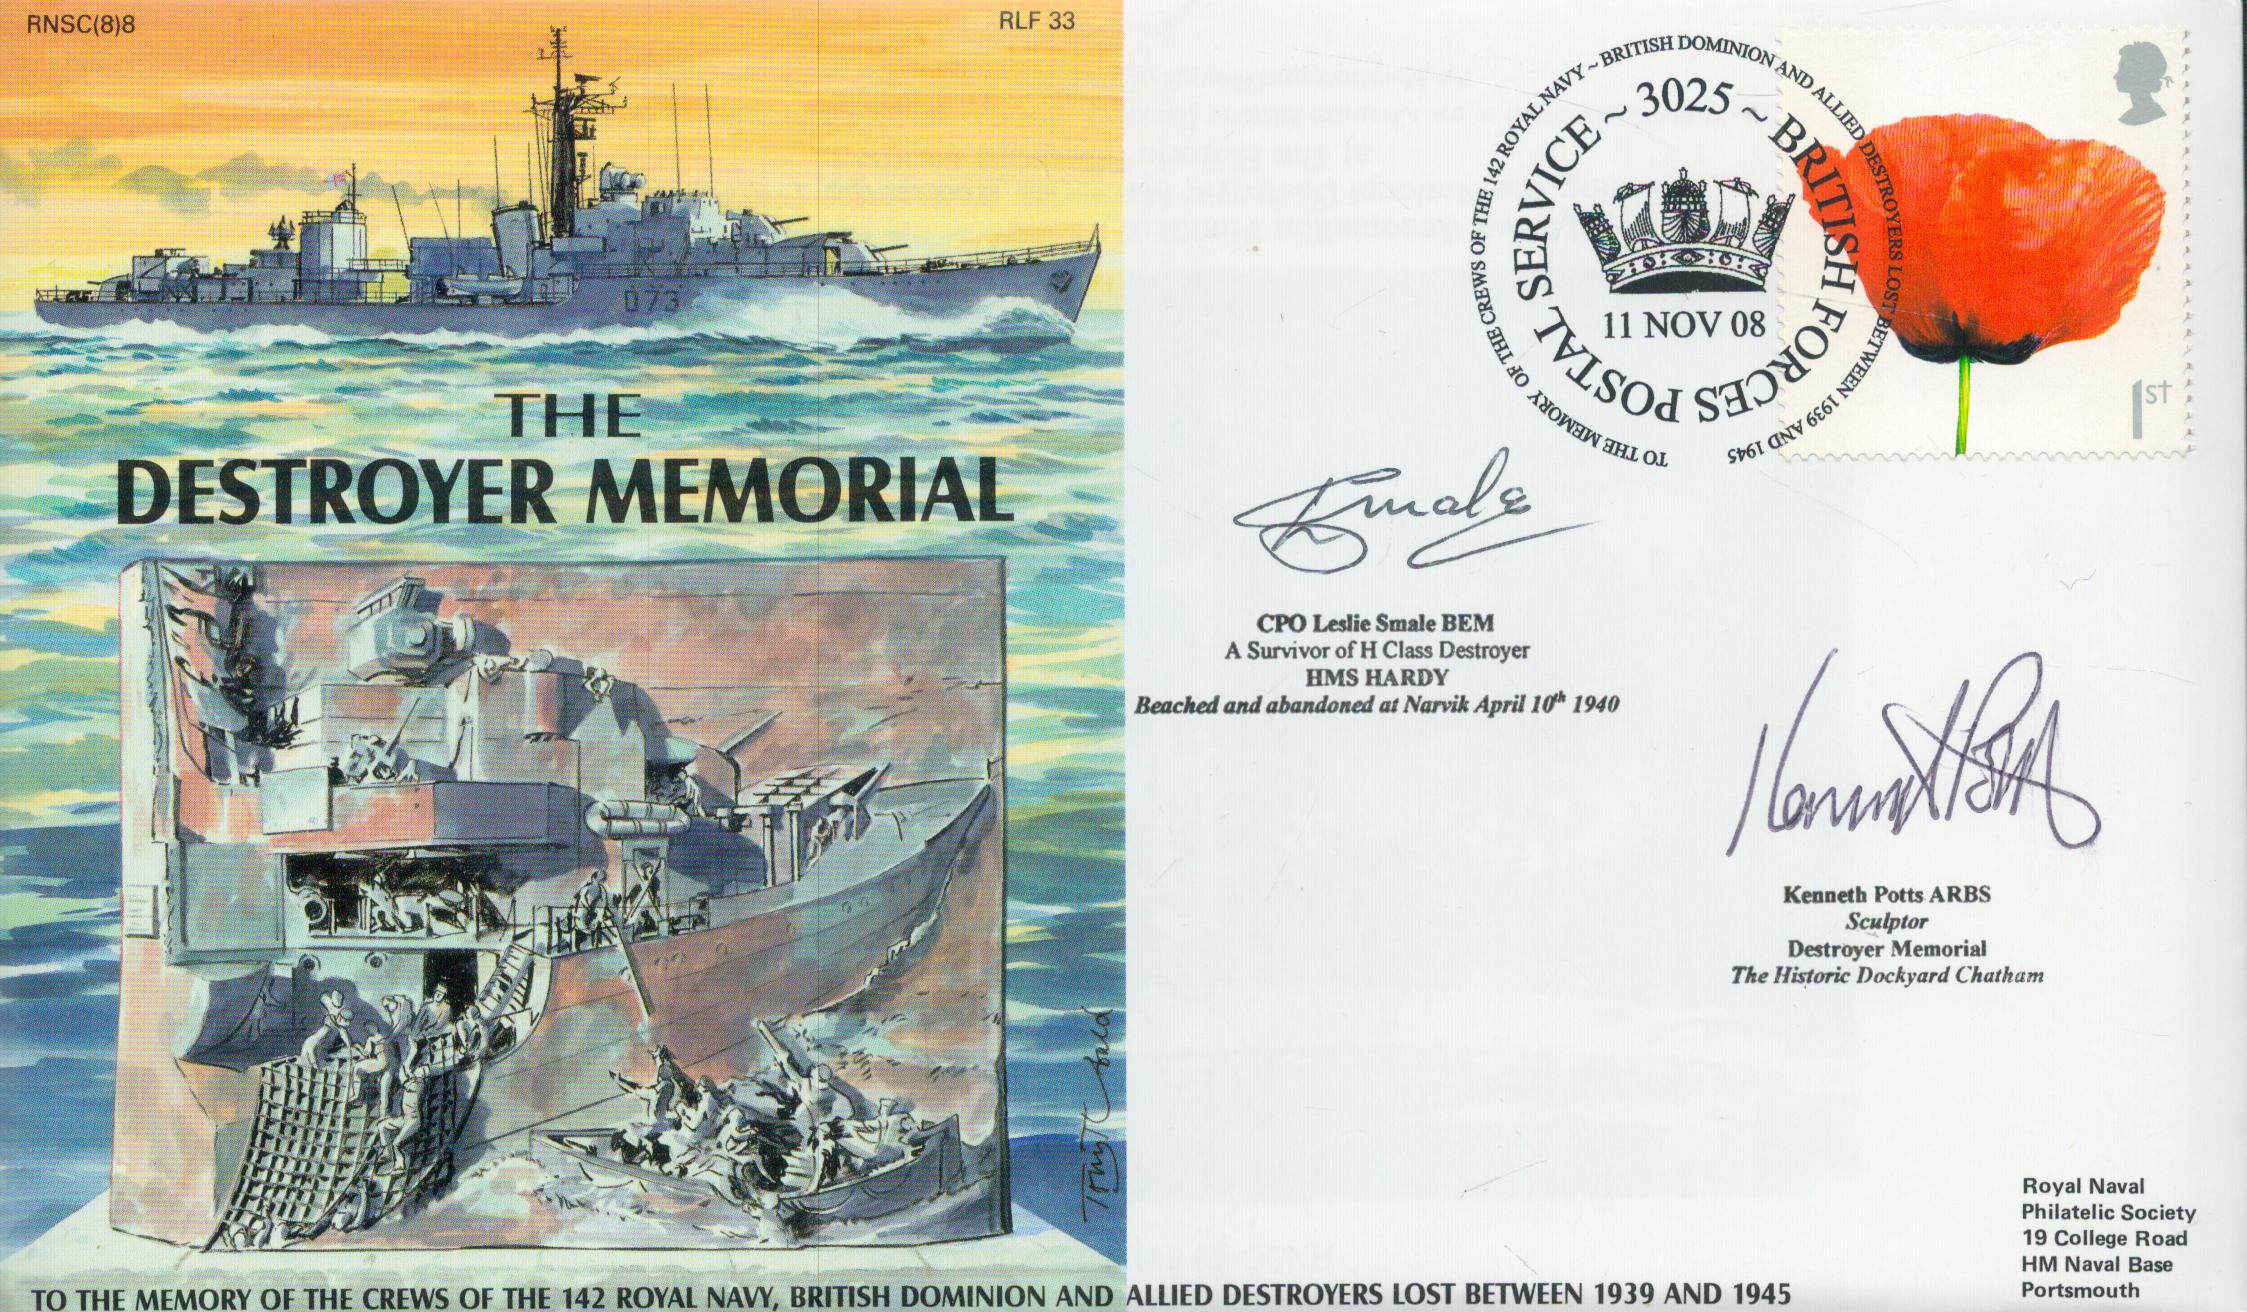 WW2 Double signed Destroyer Memorial official Navy cover RNSC(8)8 signed by CPO Leslie Smale BEM HMS